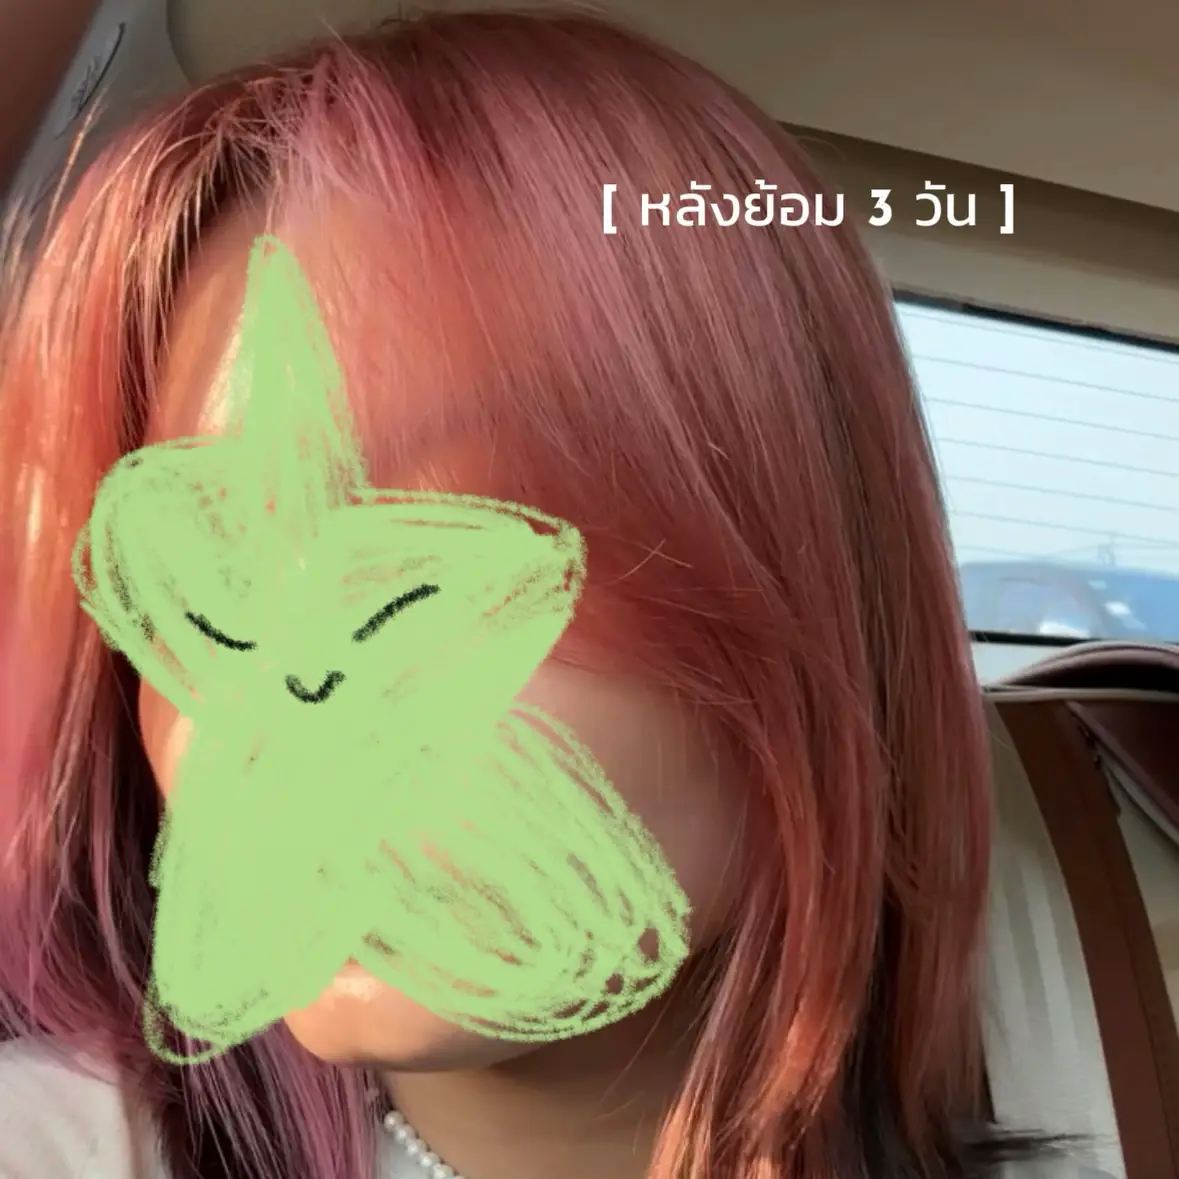 Have faded pink hair? Try out Narwhal for your next look 💕 #pinkhair , bleaching box dyed hair